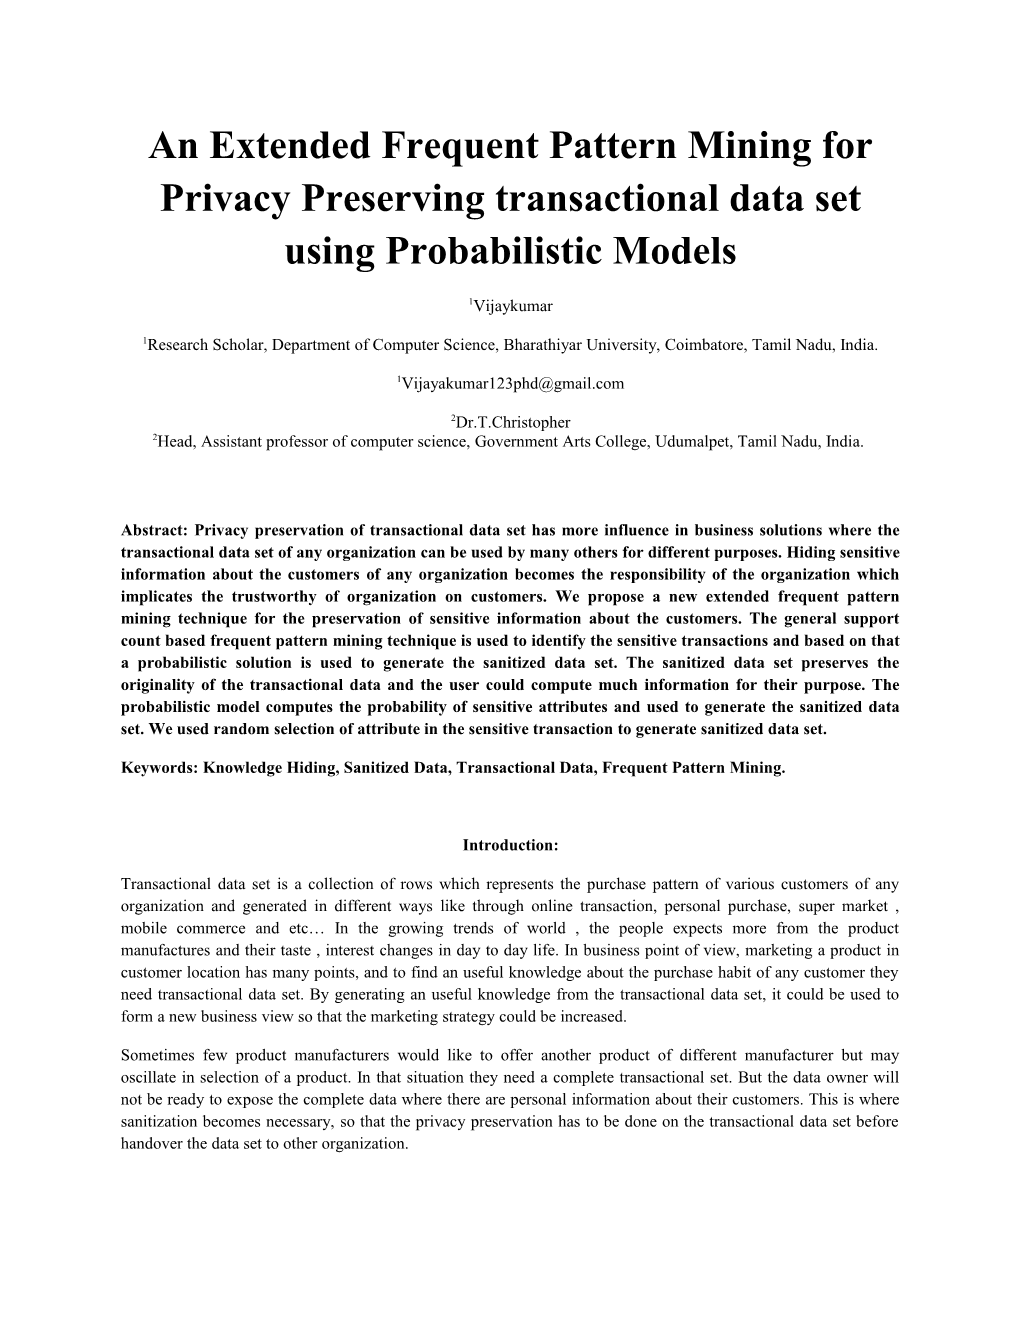 An Extended Frequent Pattern Mining for Privacy Preserving Transactional Data Set Using